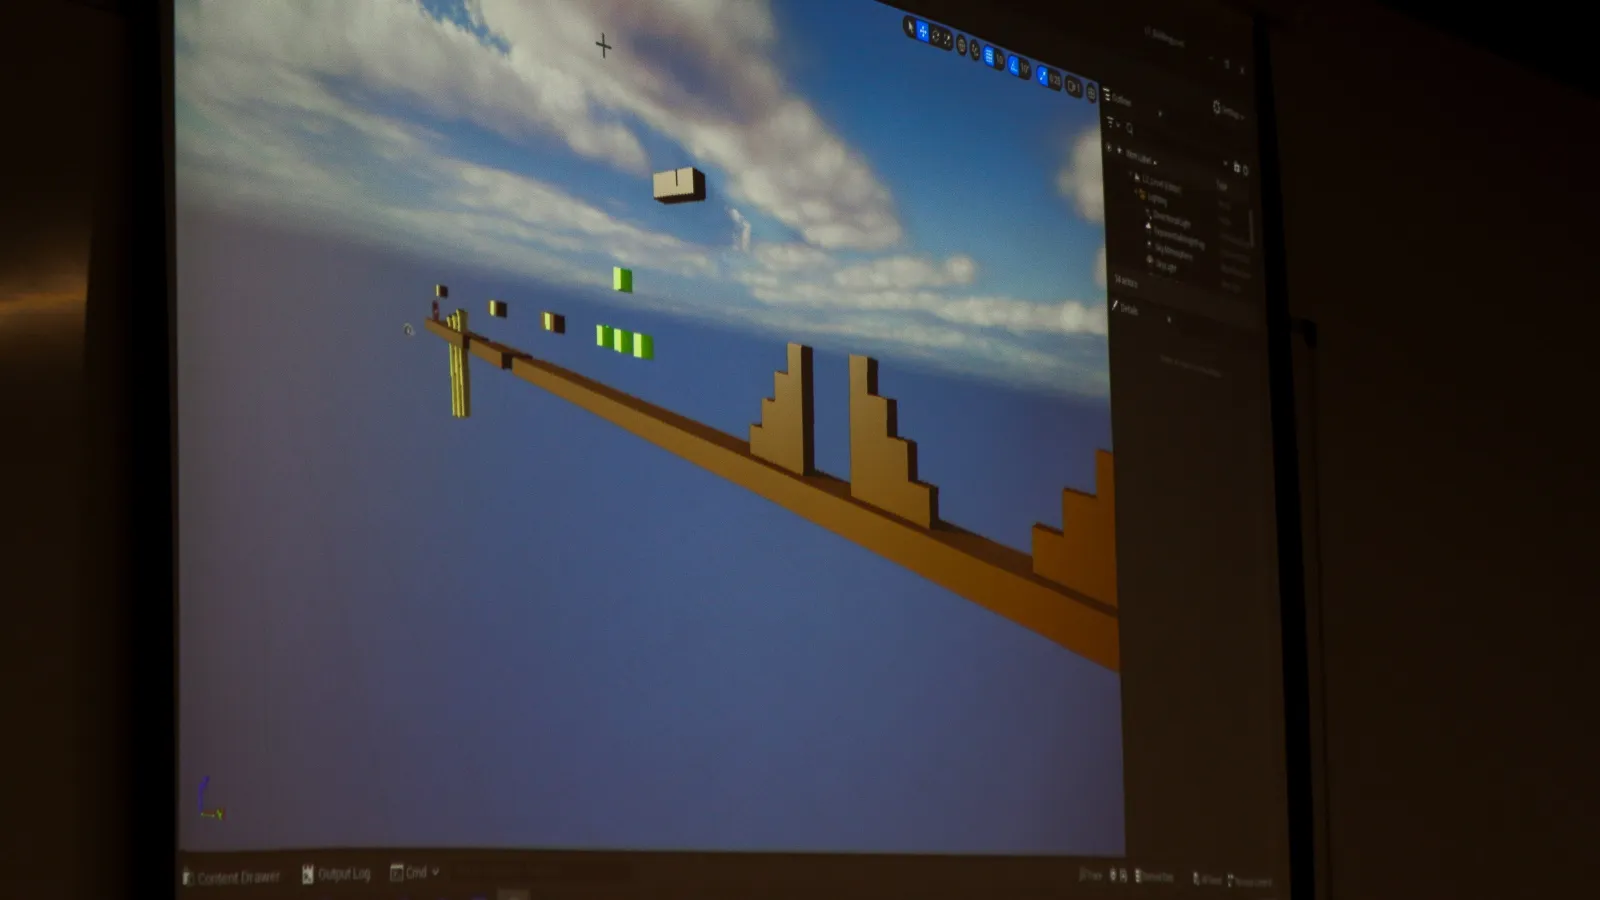 Big screen shows the example used by the instructor on how to create a simple game environment, with different obstacles and platforms, in the Unreal Engine editor